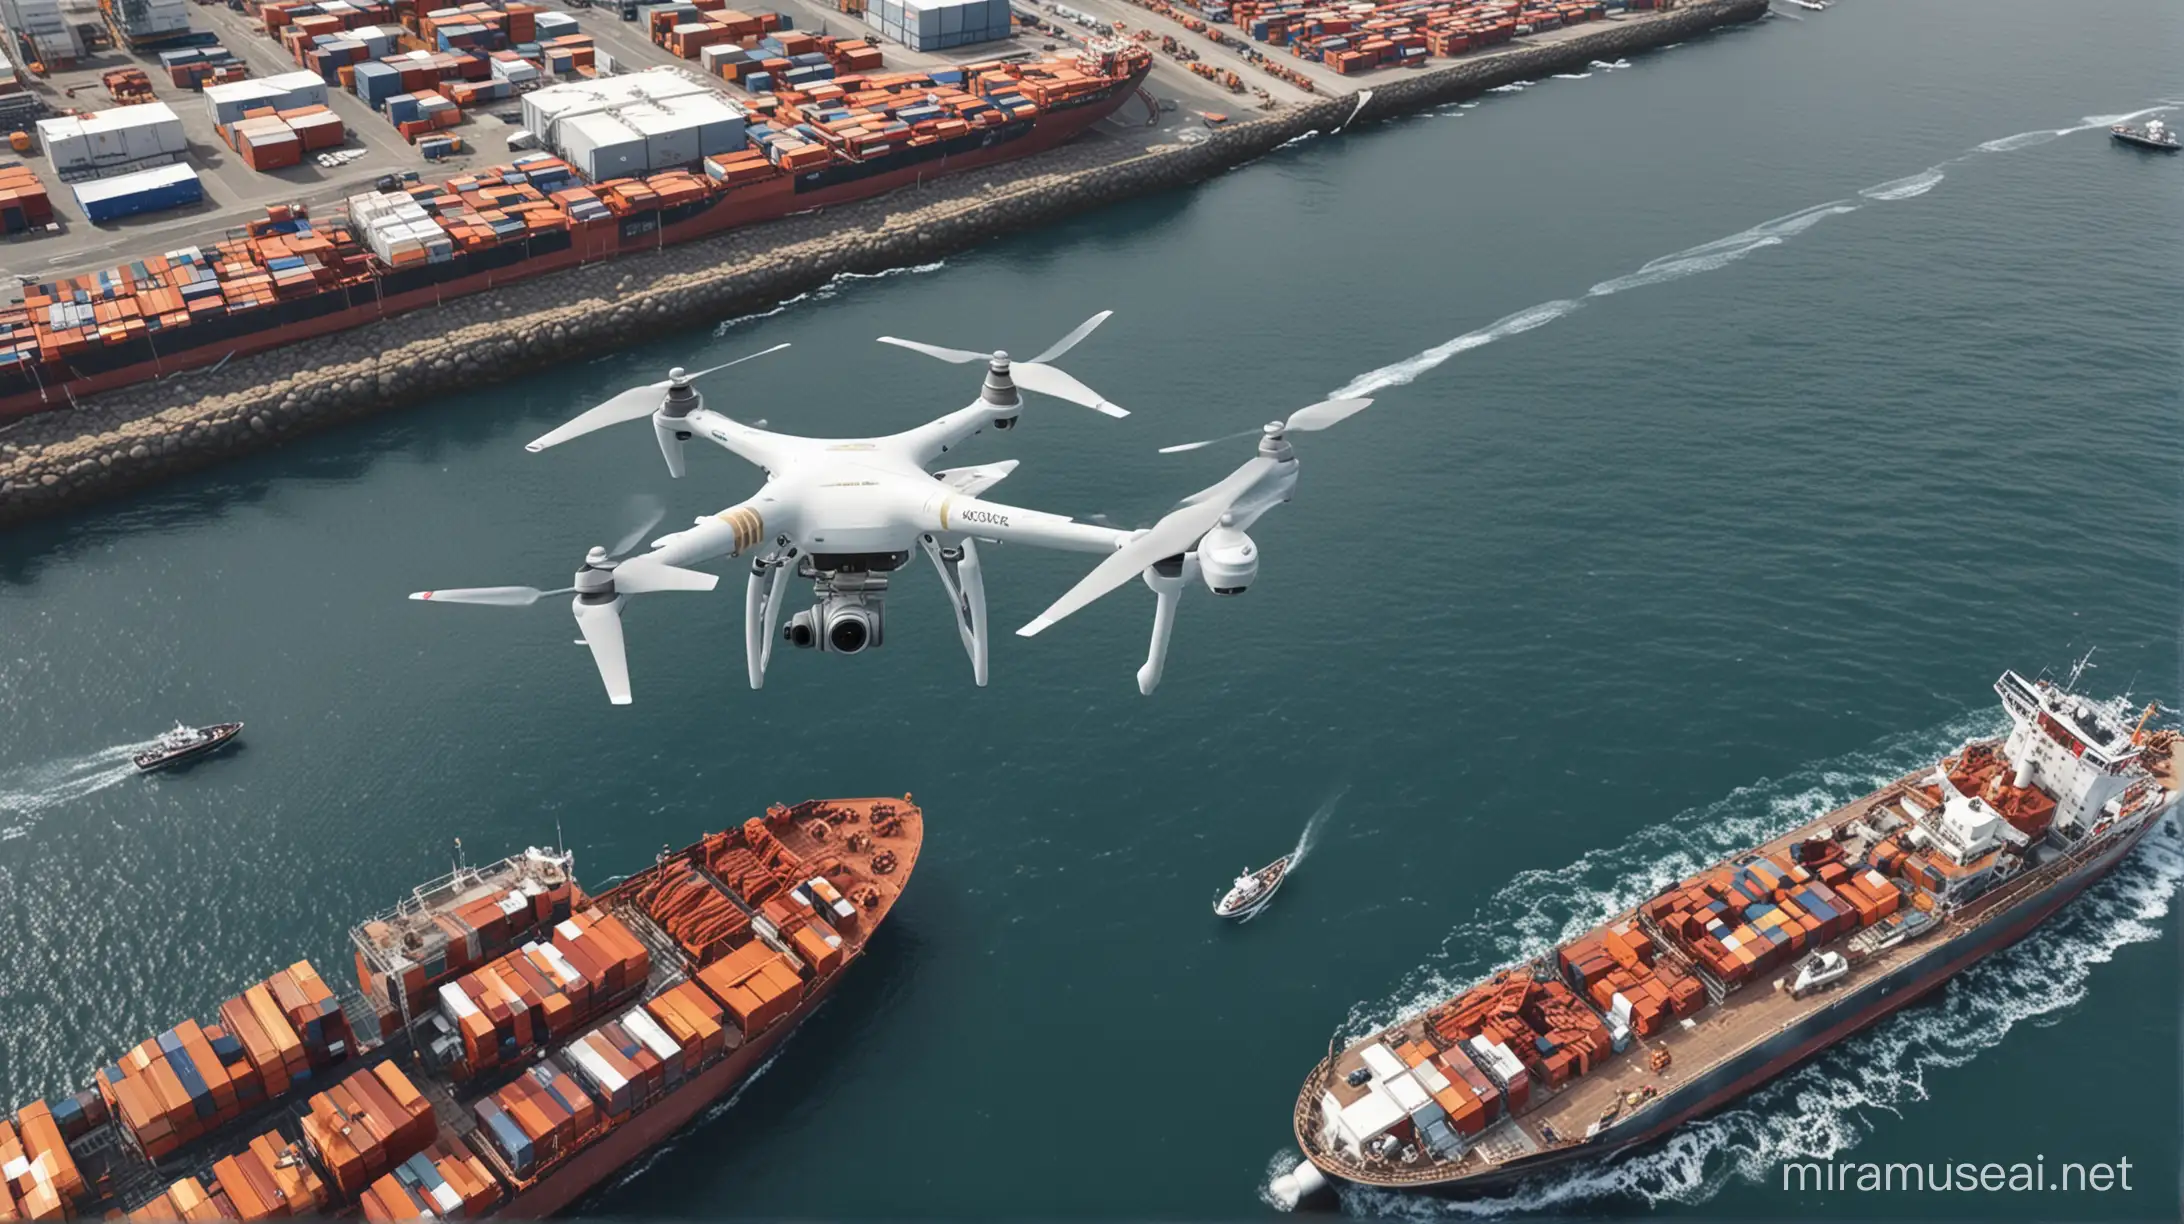 Create an illustration depicting a drone in flight over a maritime setting, showcasing its various use cases. Highlight scenarios such as inspection of enclosed spaces, navigation in reduced visibility, assistance in firefighting, search and rescue operations, and drydock inspections. Capture the drone's interaction with ships, ports, and other maritime infrastructure, emphasizing its role in enhancing safety, efficiency, and innovation in the maritime industry. Reduce size of the drone